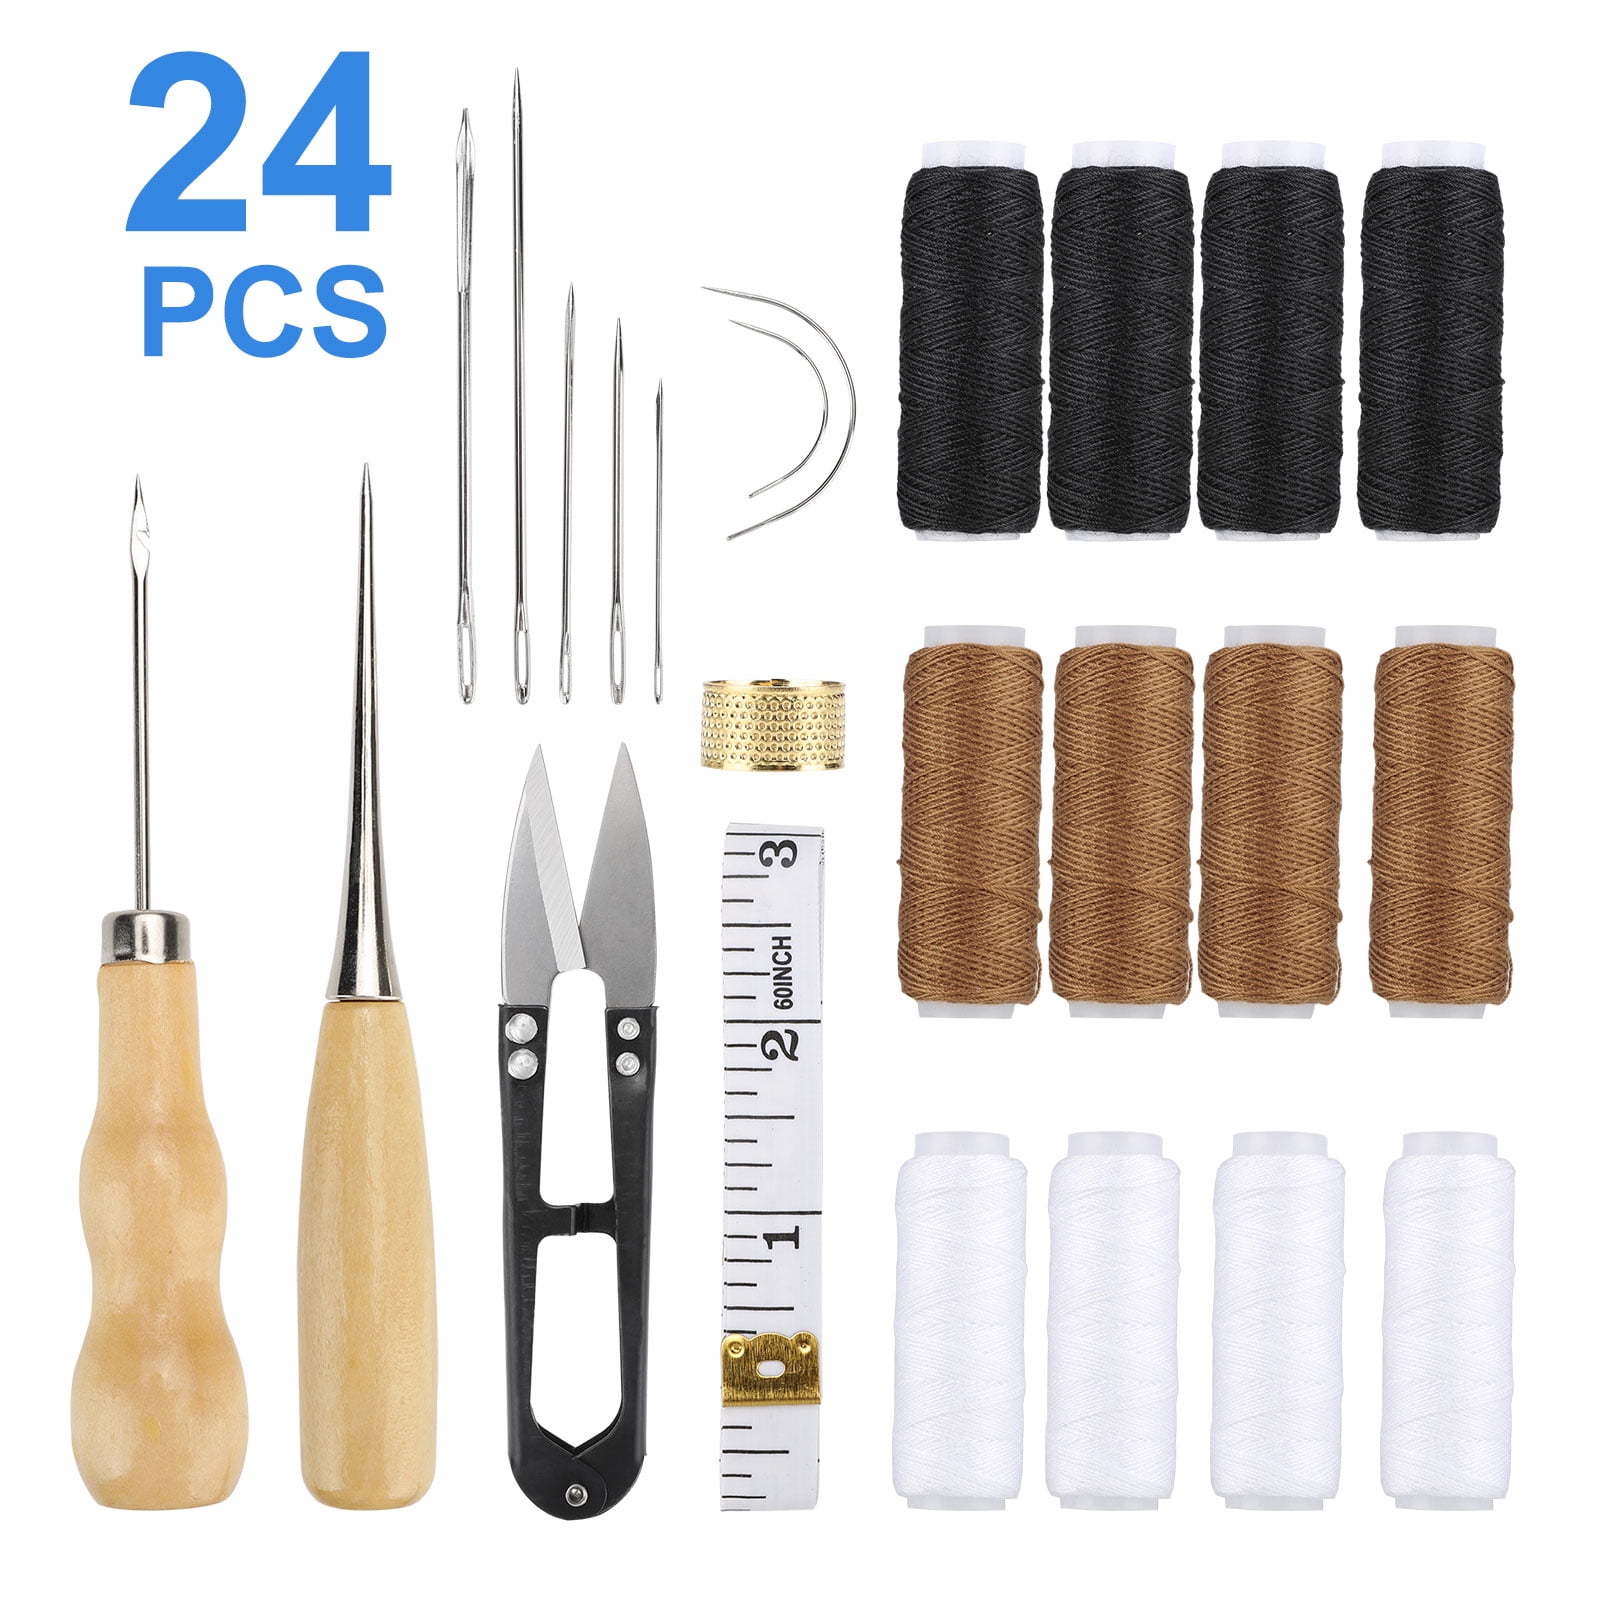 4x Needles Canvas Leather Sewing Awl Hand Stitcher Tools For Shoes Repair Sets 